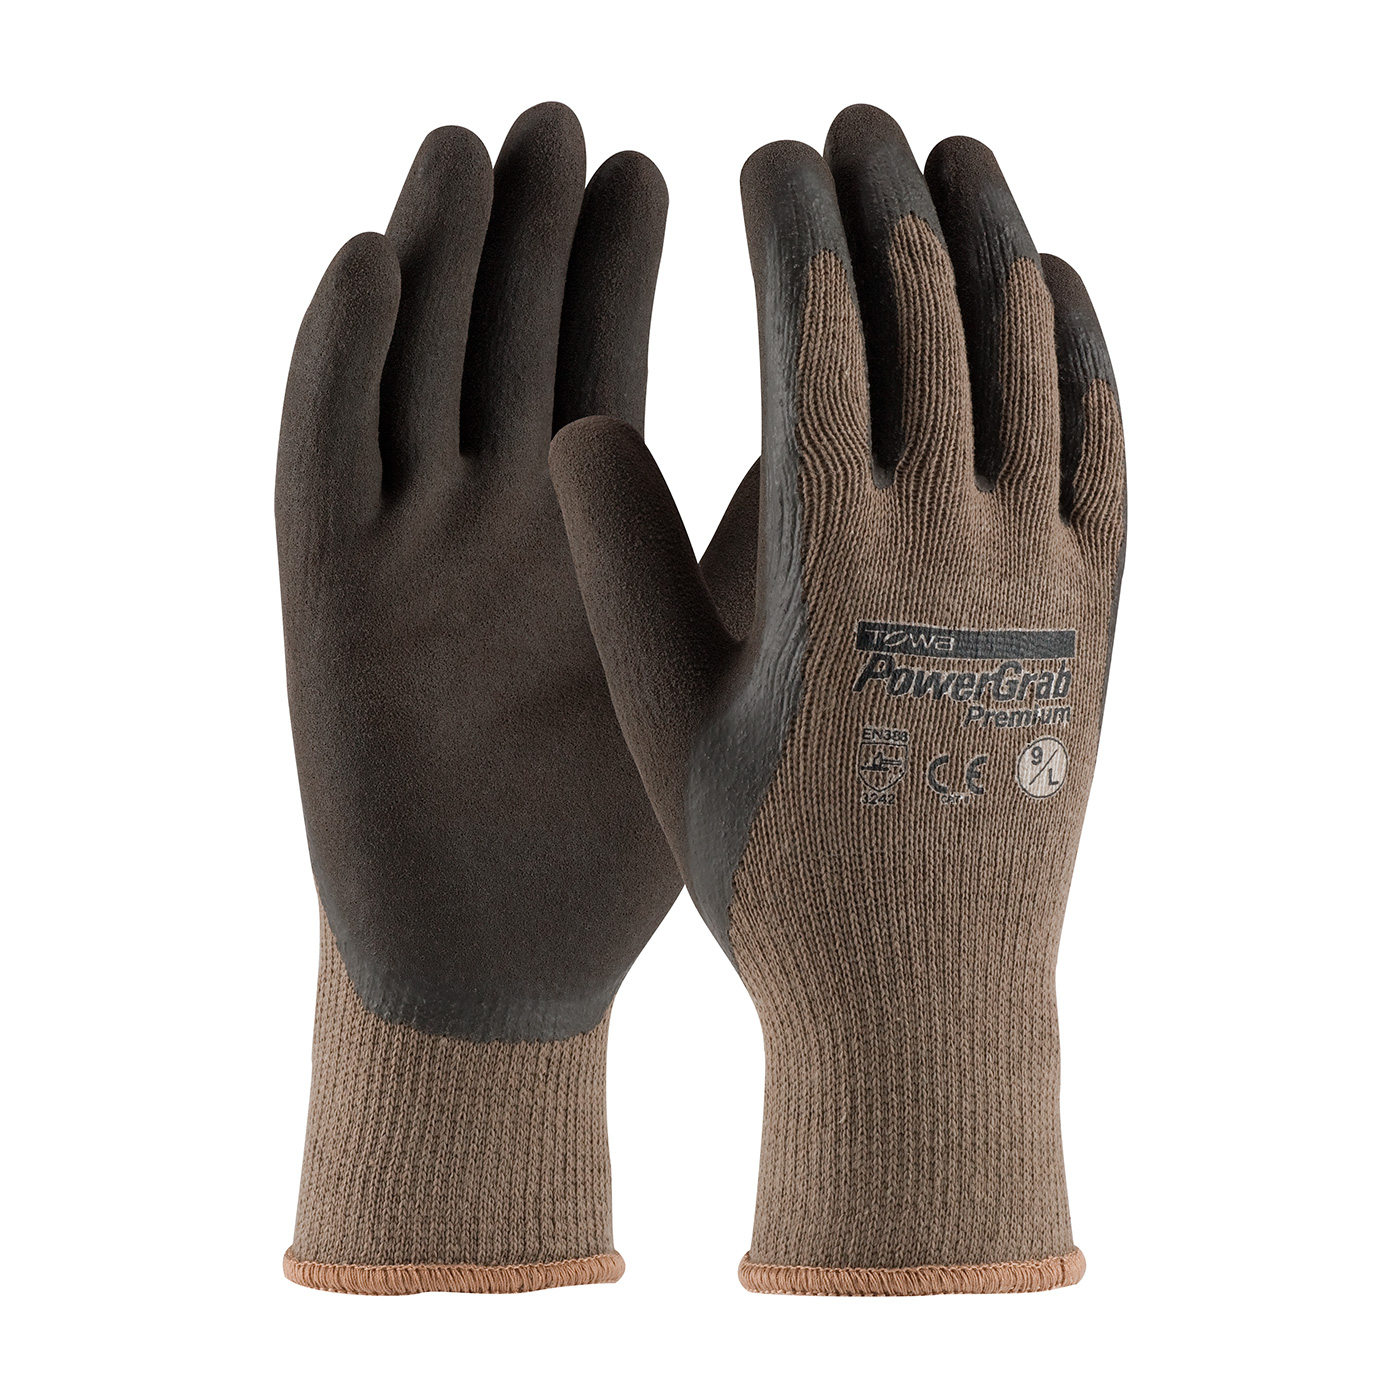 PIP 39-C1500/L PowerGrab Premium Seamless Knit Cotton/Polyester Glove with Latex Coated MicroFinish Grip on Palm & Fingers - Large PID-39 C1500 L